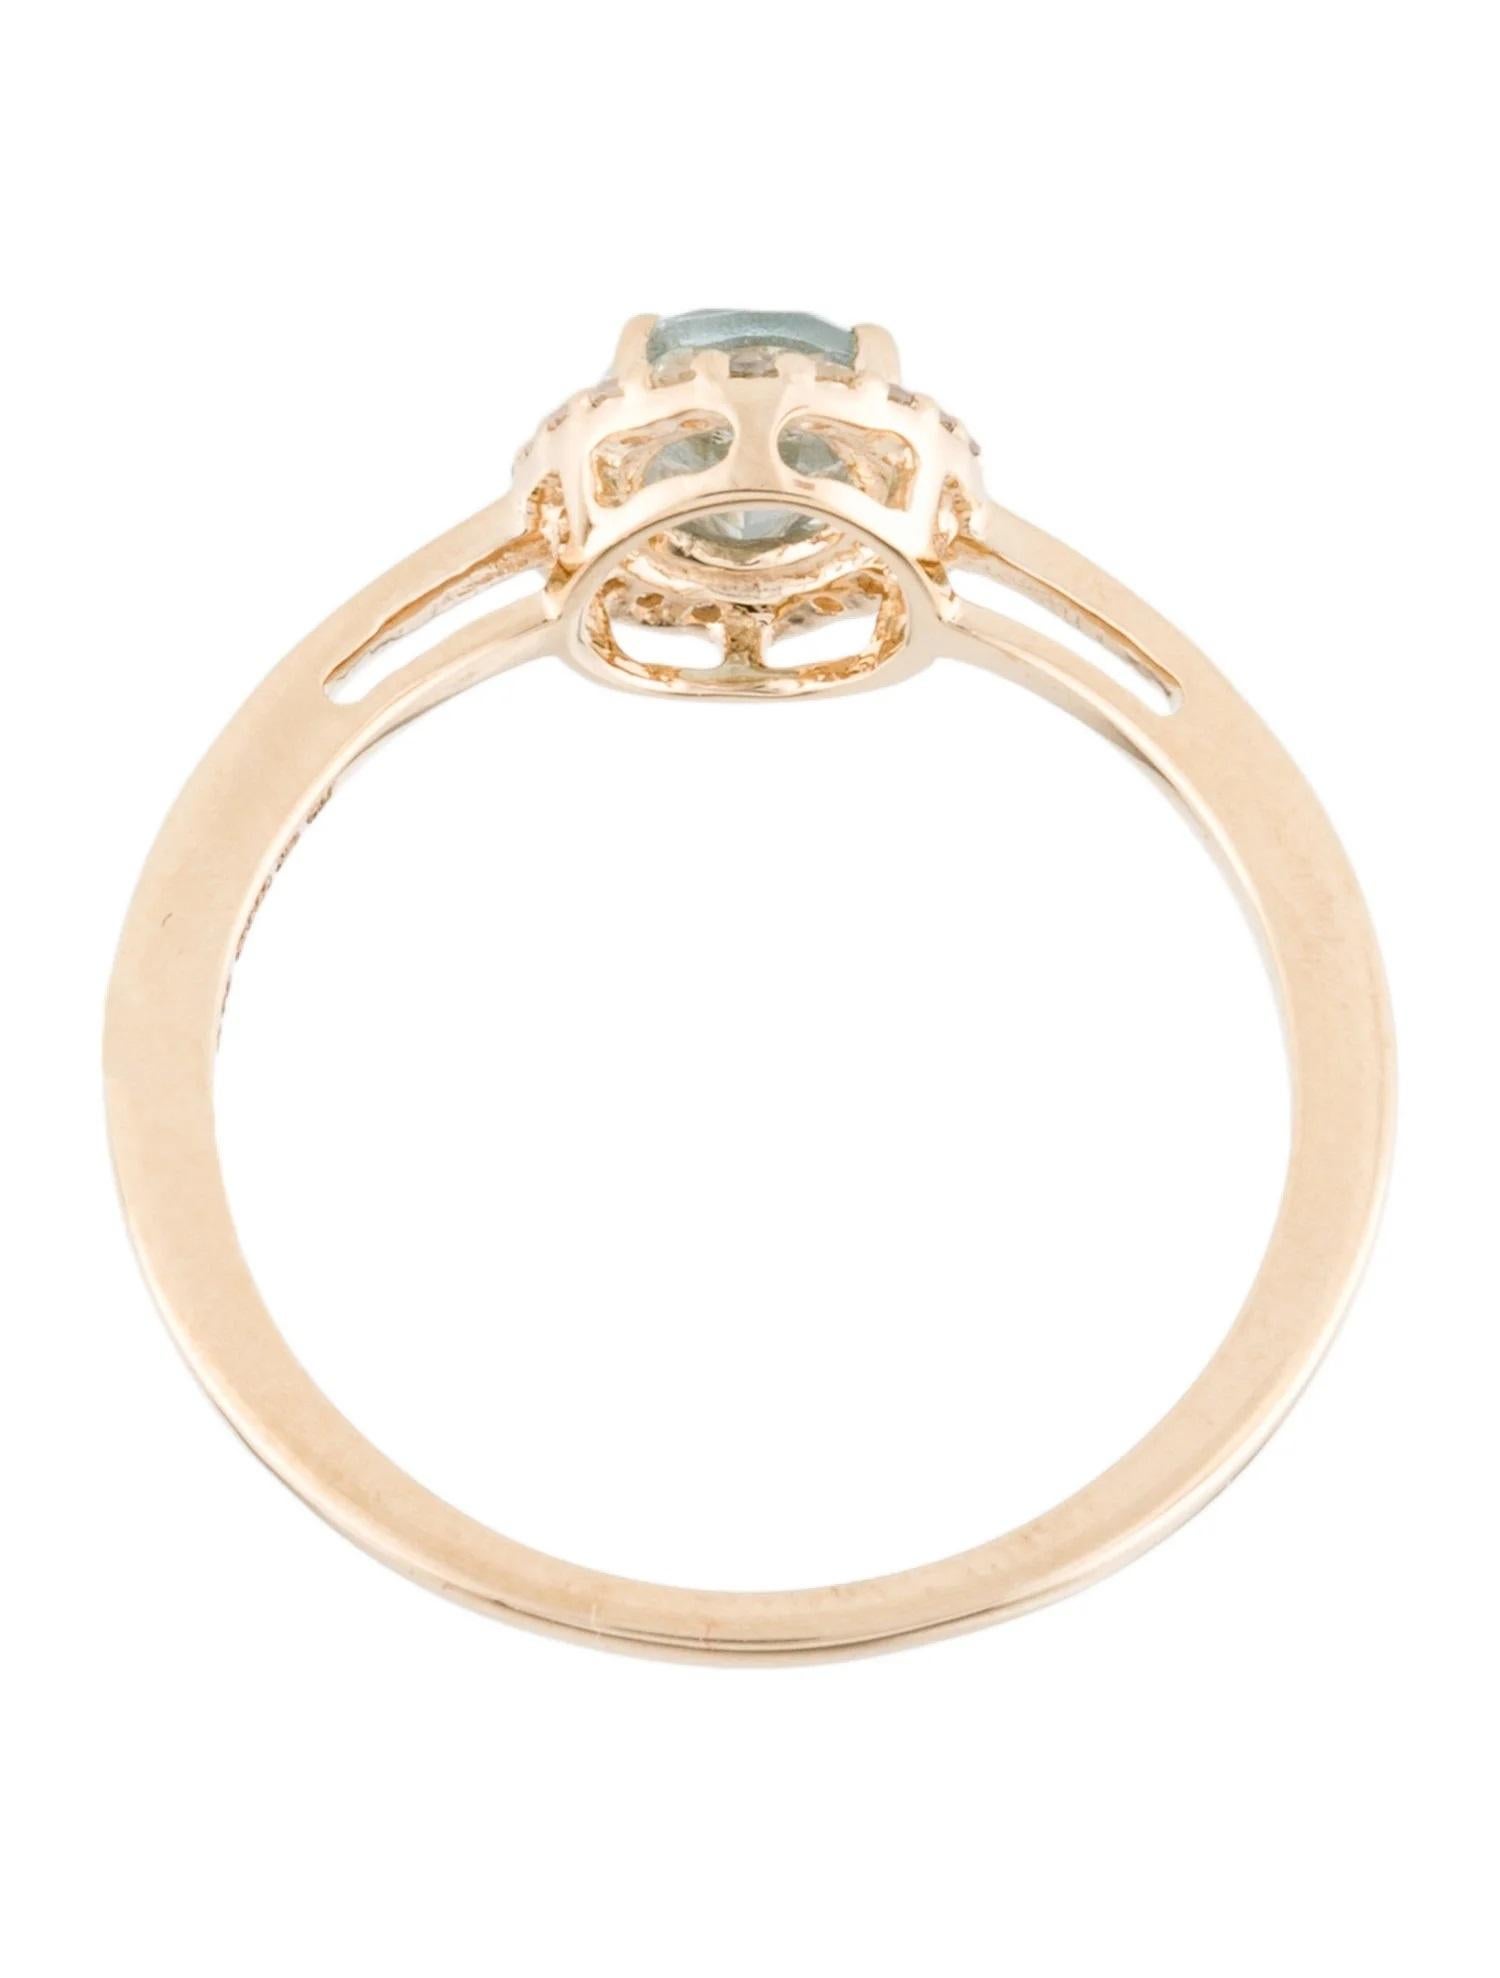 14K Aquamarine & Diamond Cocktail Ring Size 6.5 - Oval Aquamarine, Single Cut In New Condition For Sale In Holtsville, NY